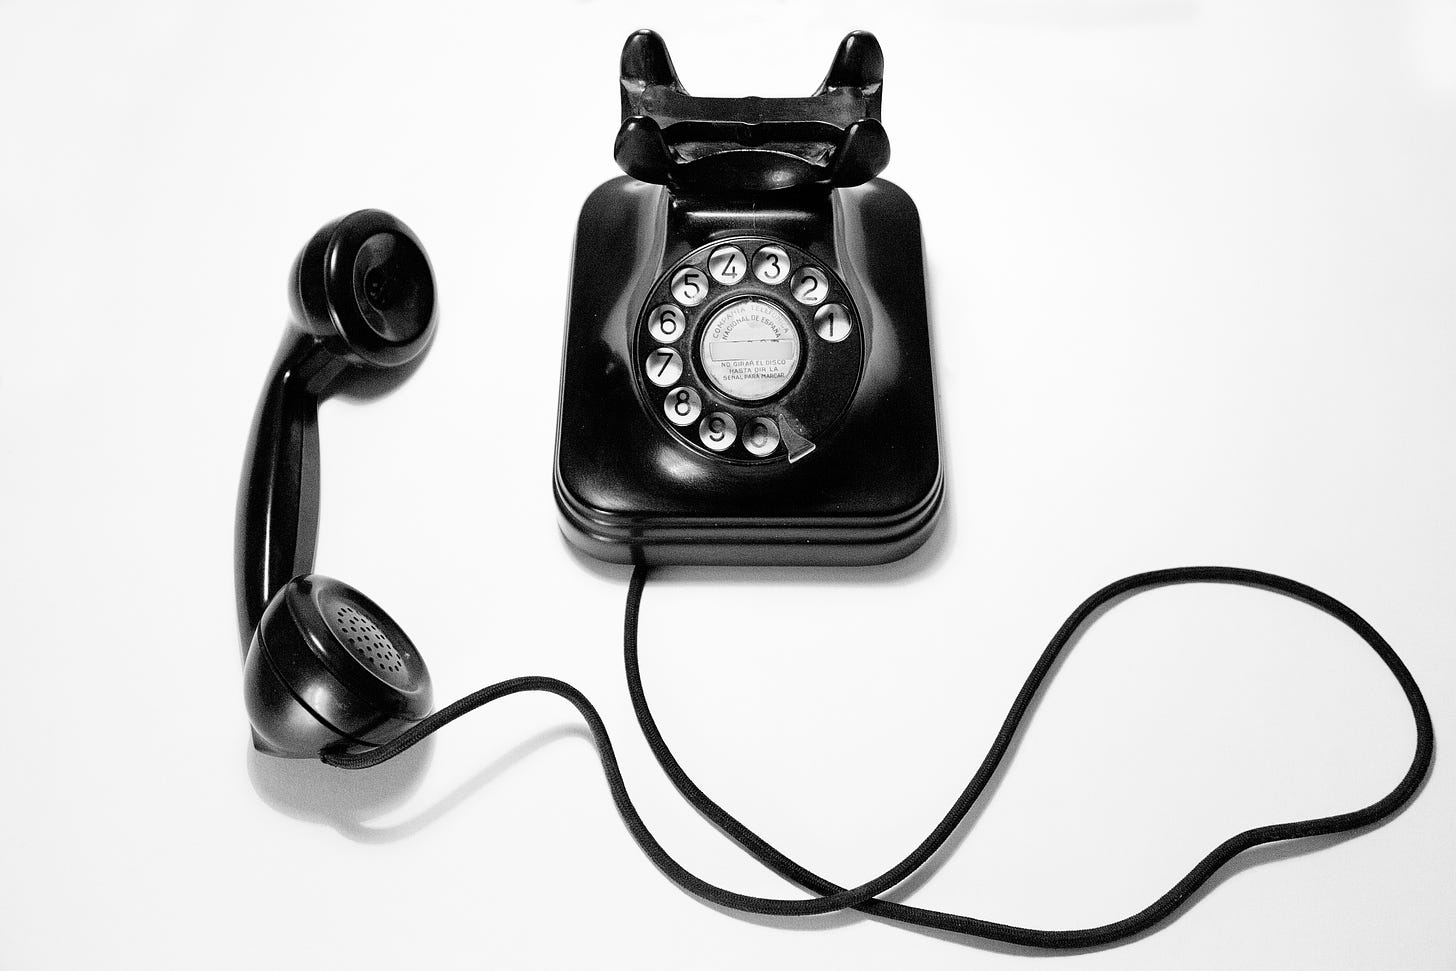 Black rotary phone on a white background